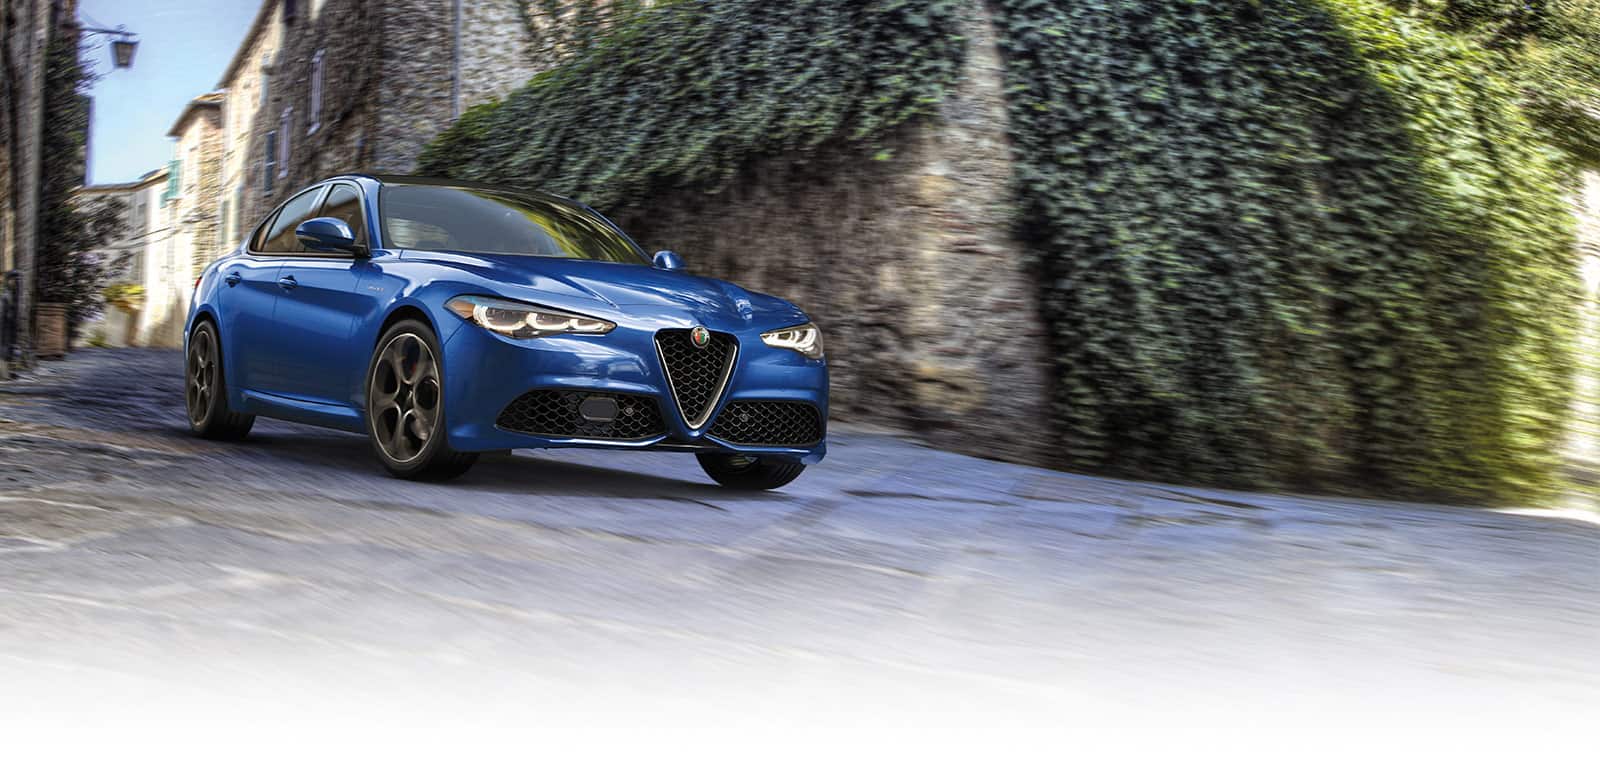 A blue 2024 Alfa Romeo Giulia being driven down a curved road in an area of classic European designed buildings. The background is blurred to indicate the vehicle is in motion.